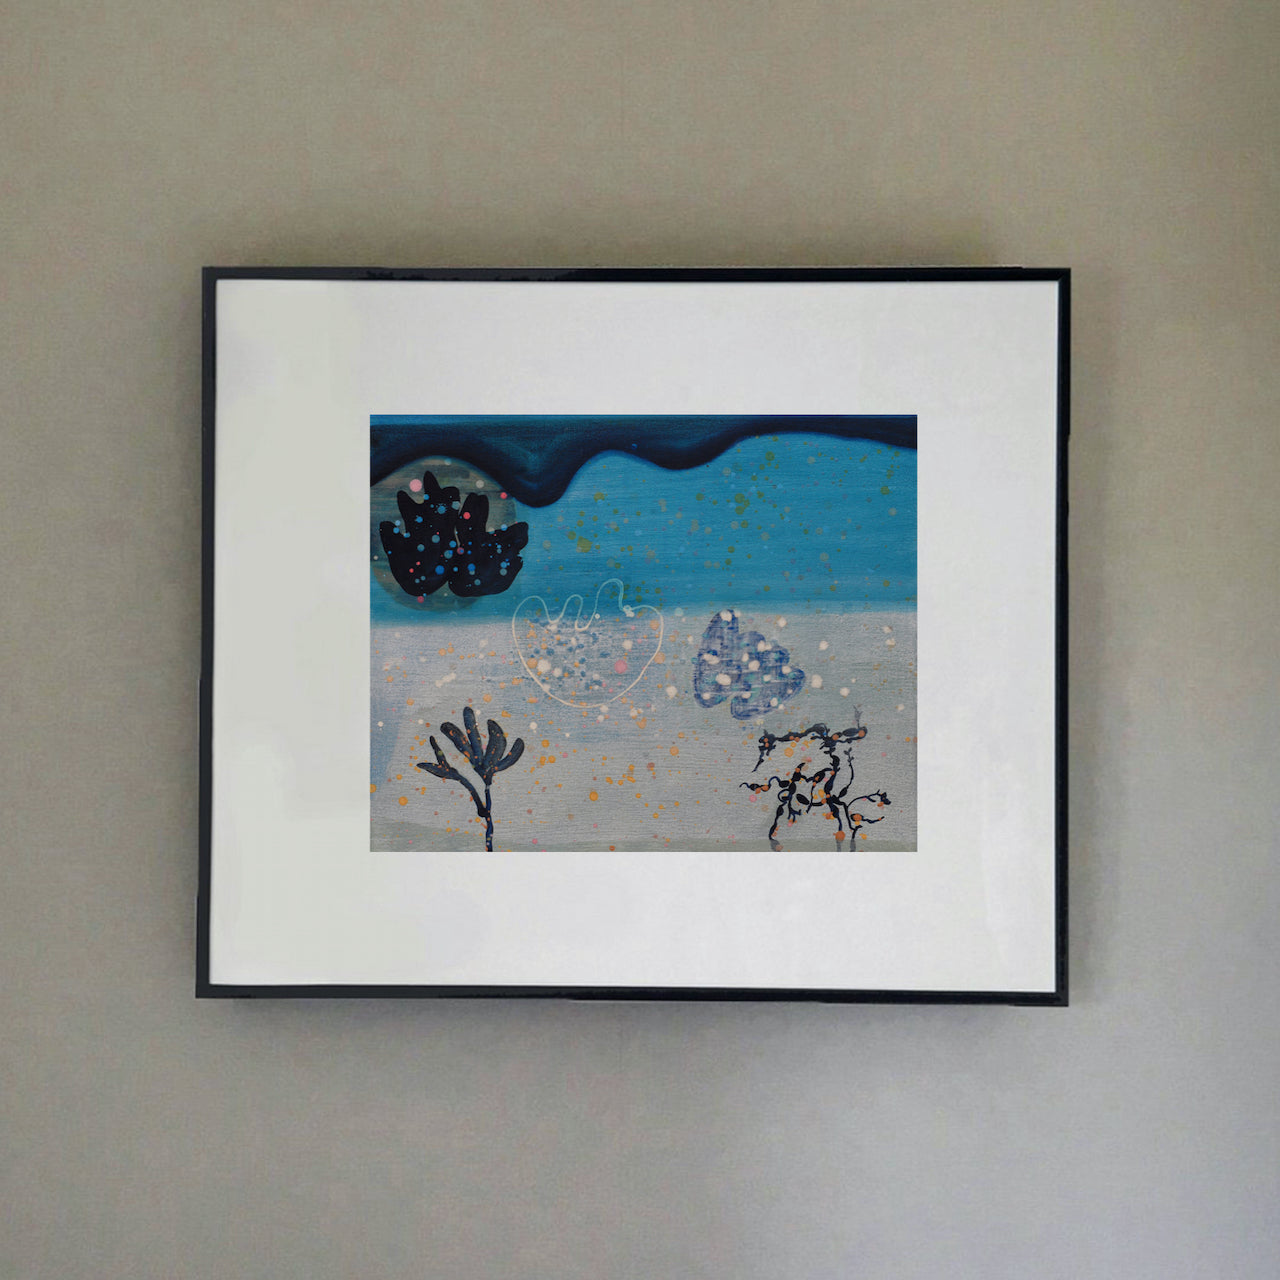 Tones of blues and greys with sea weed shapes by artist Ella Carty.